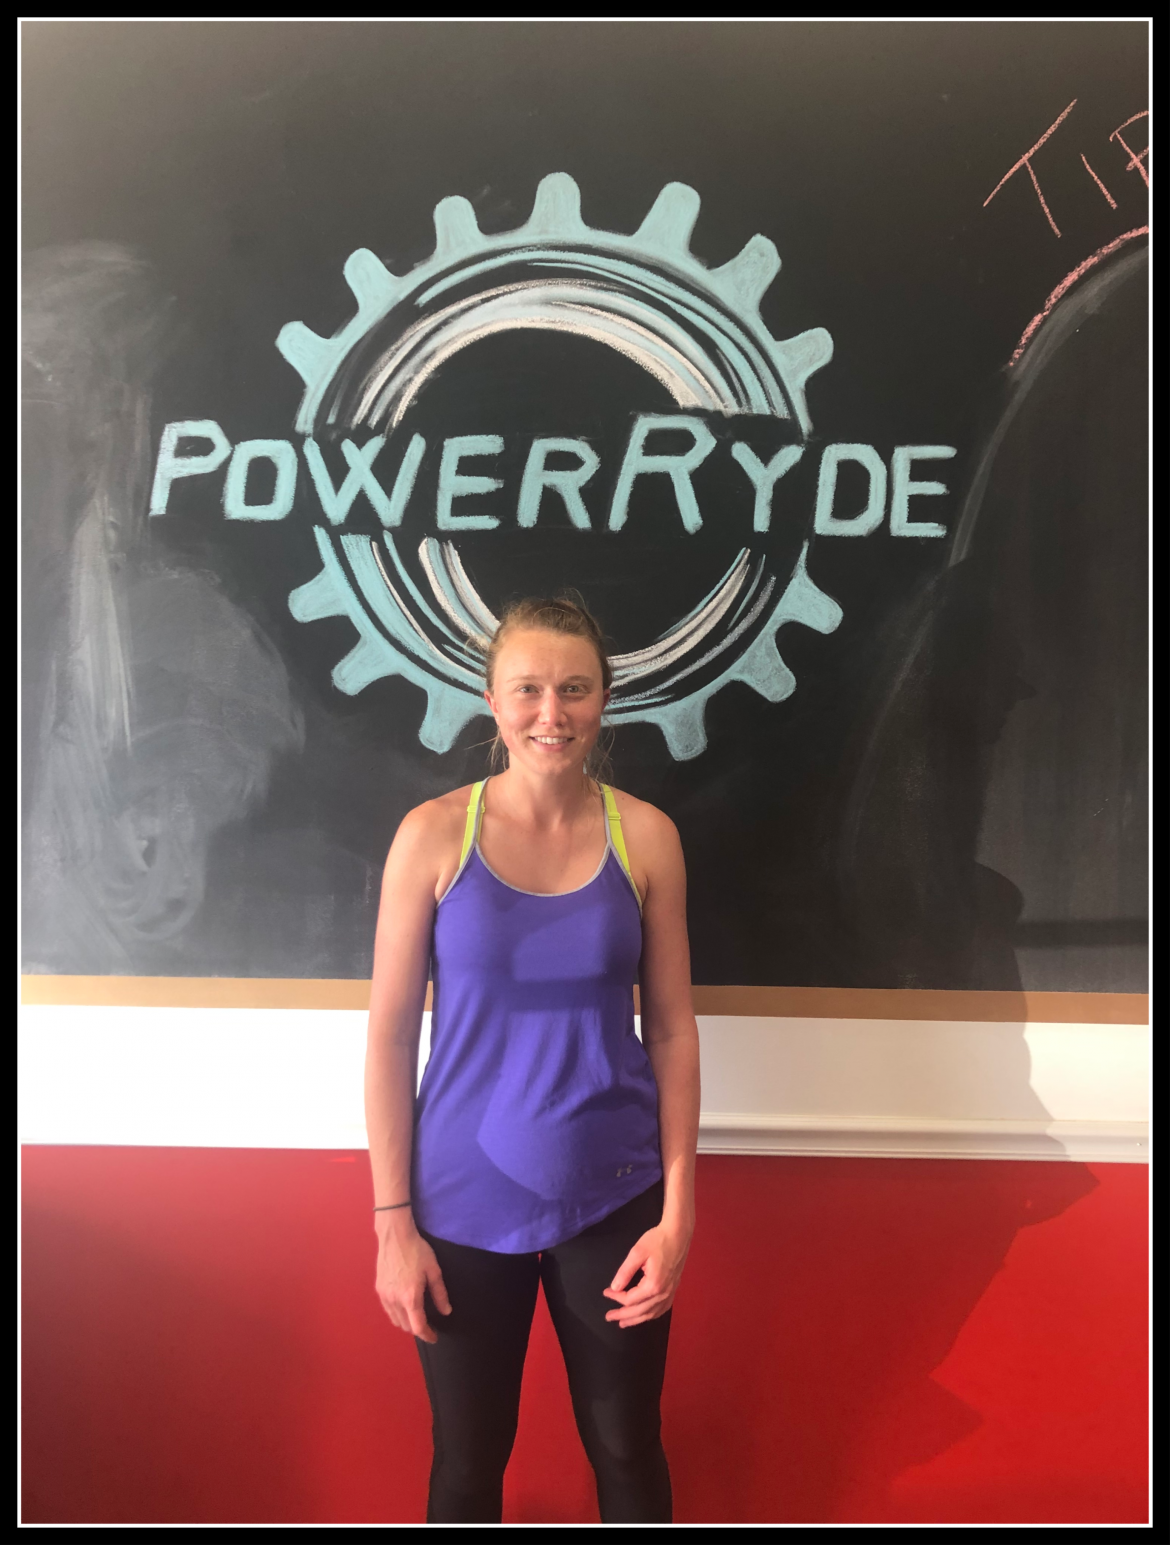 Jenna Swanson in front of chalk PowerRyde logo